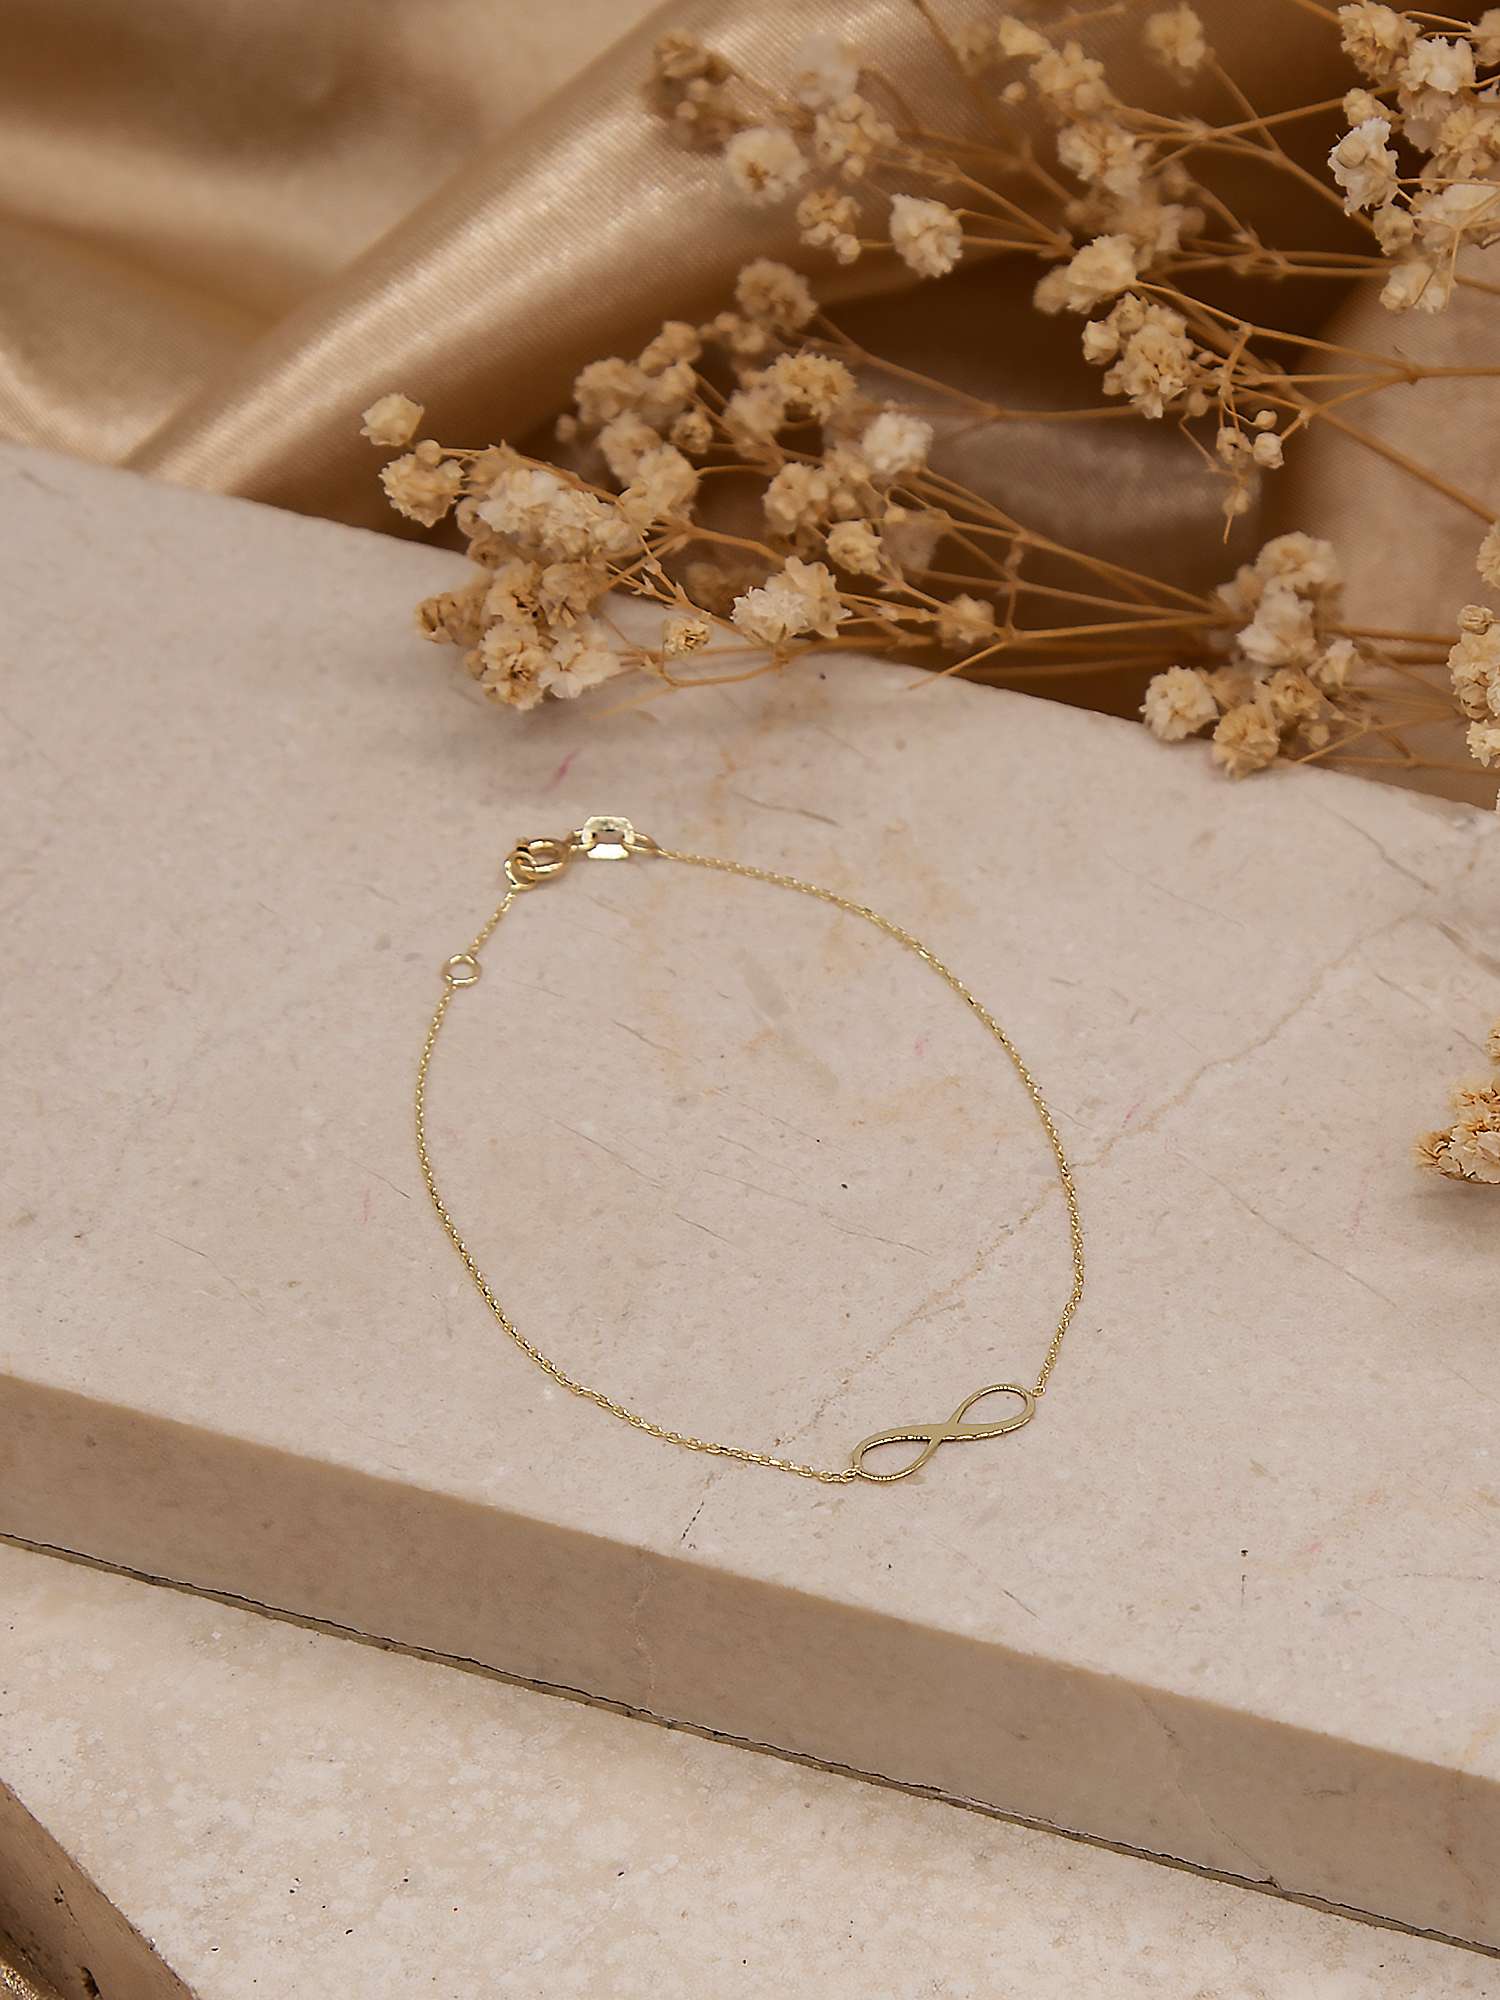 Buy IBB 9ct Gold Infinity Chain Bracelet, Gold Online at johnlewis.com